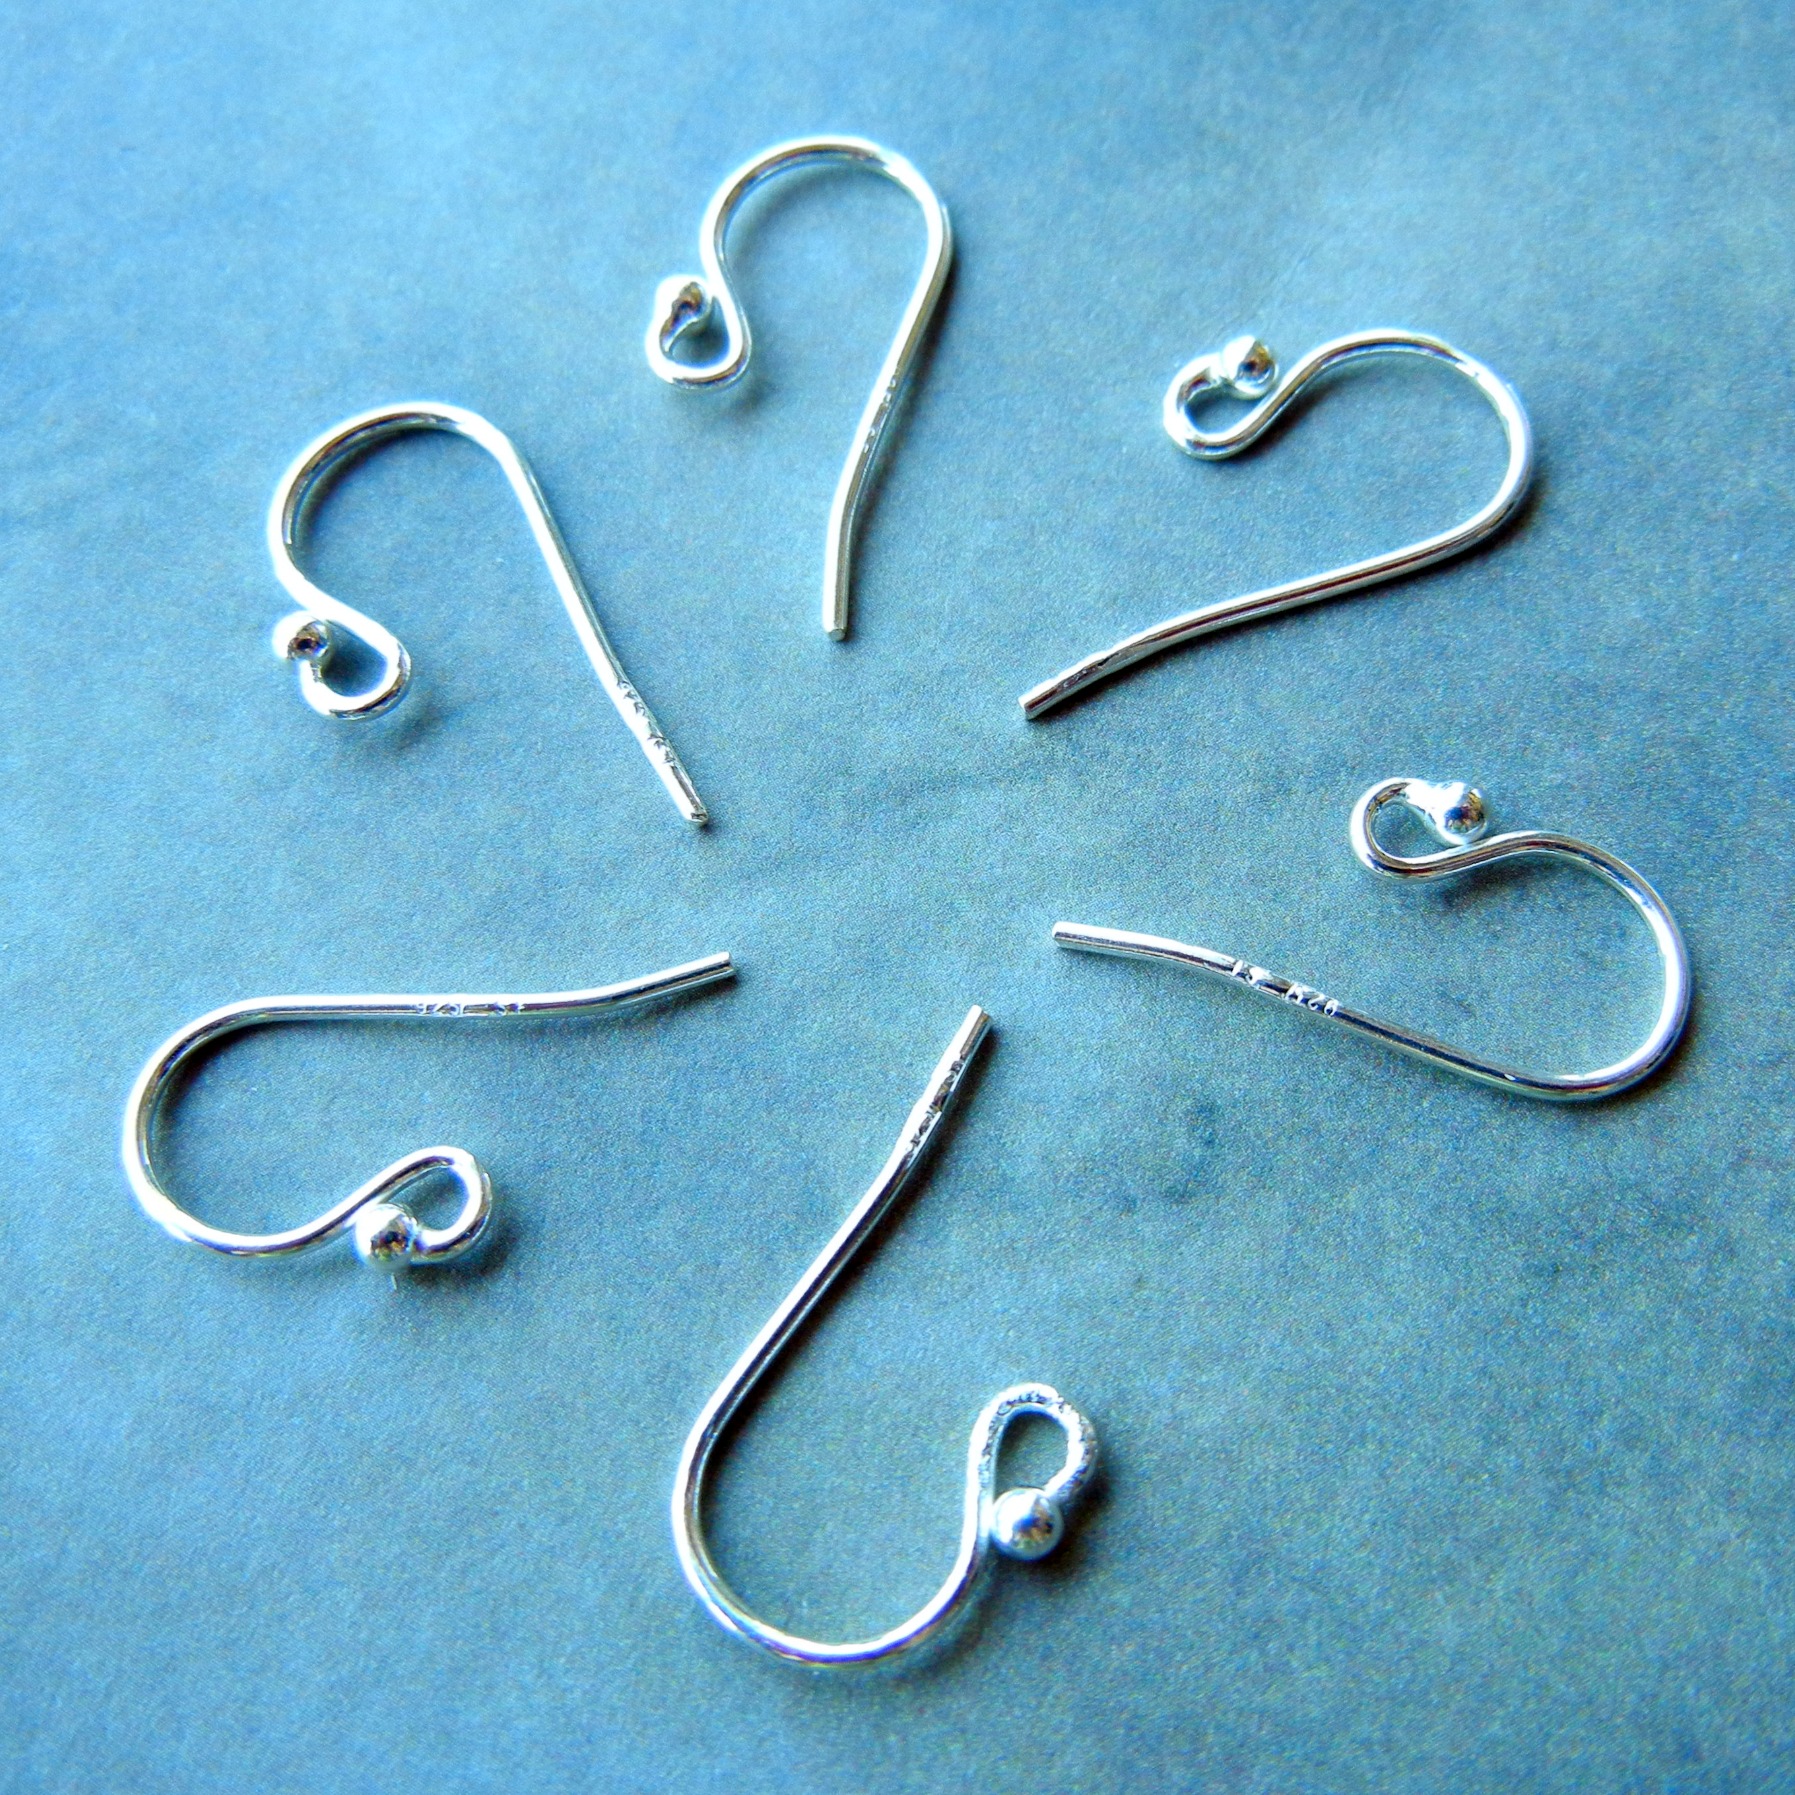 Jewelry Making Article - Sterling Silver-Filled Wire and Findings